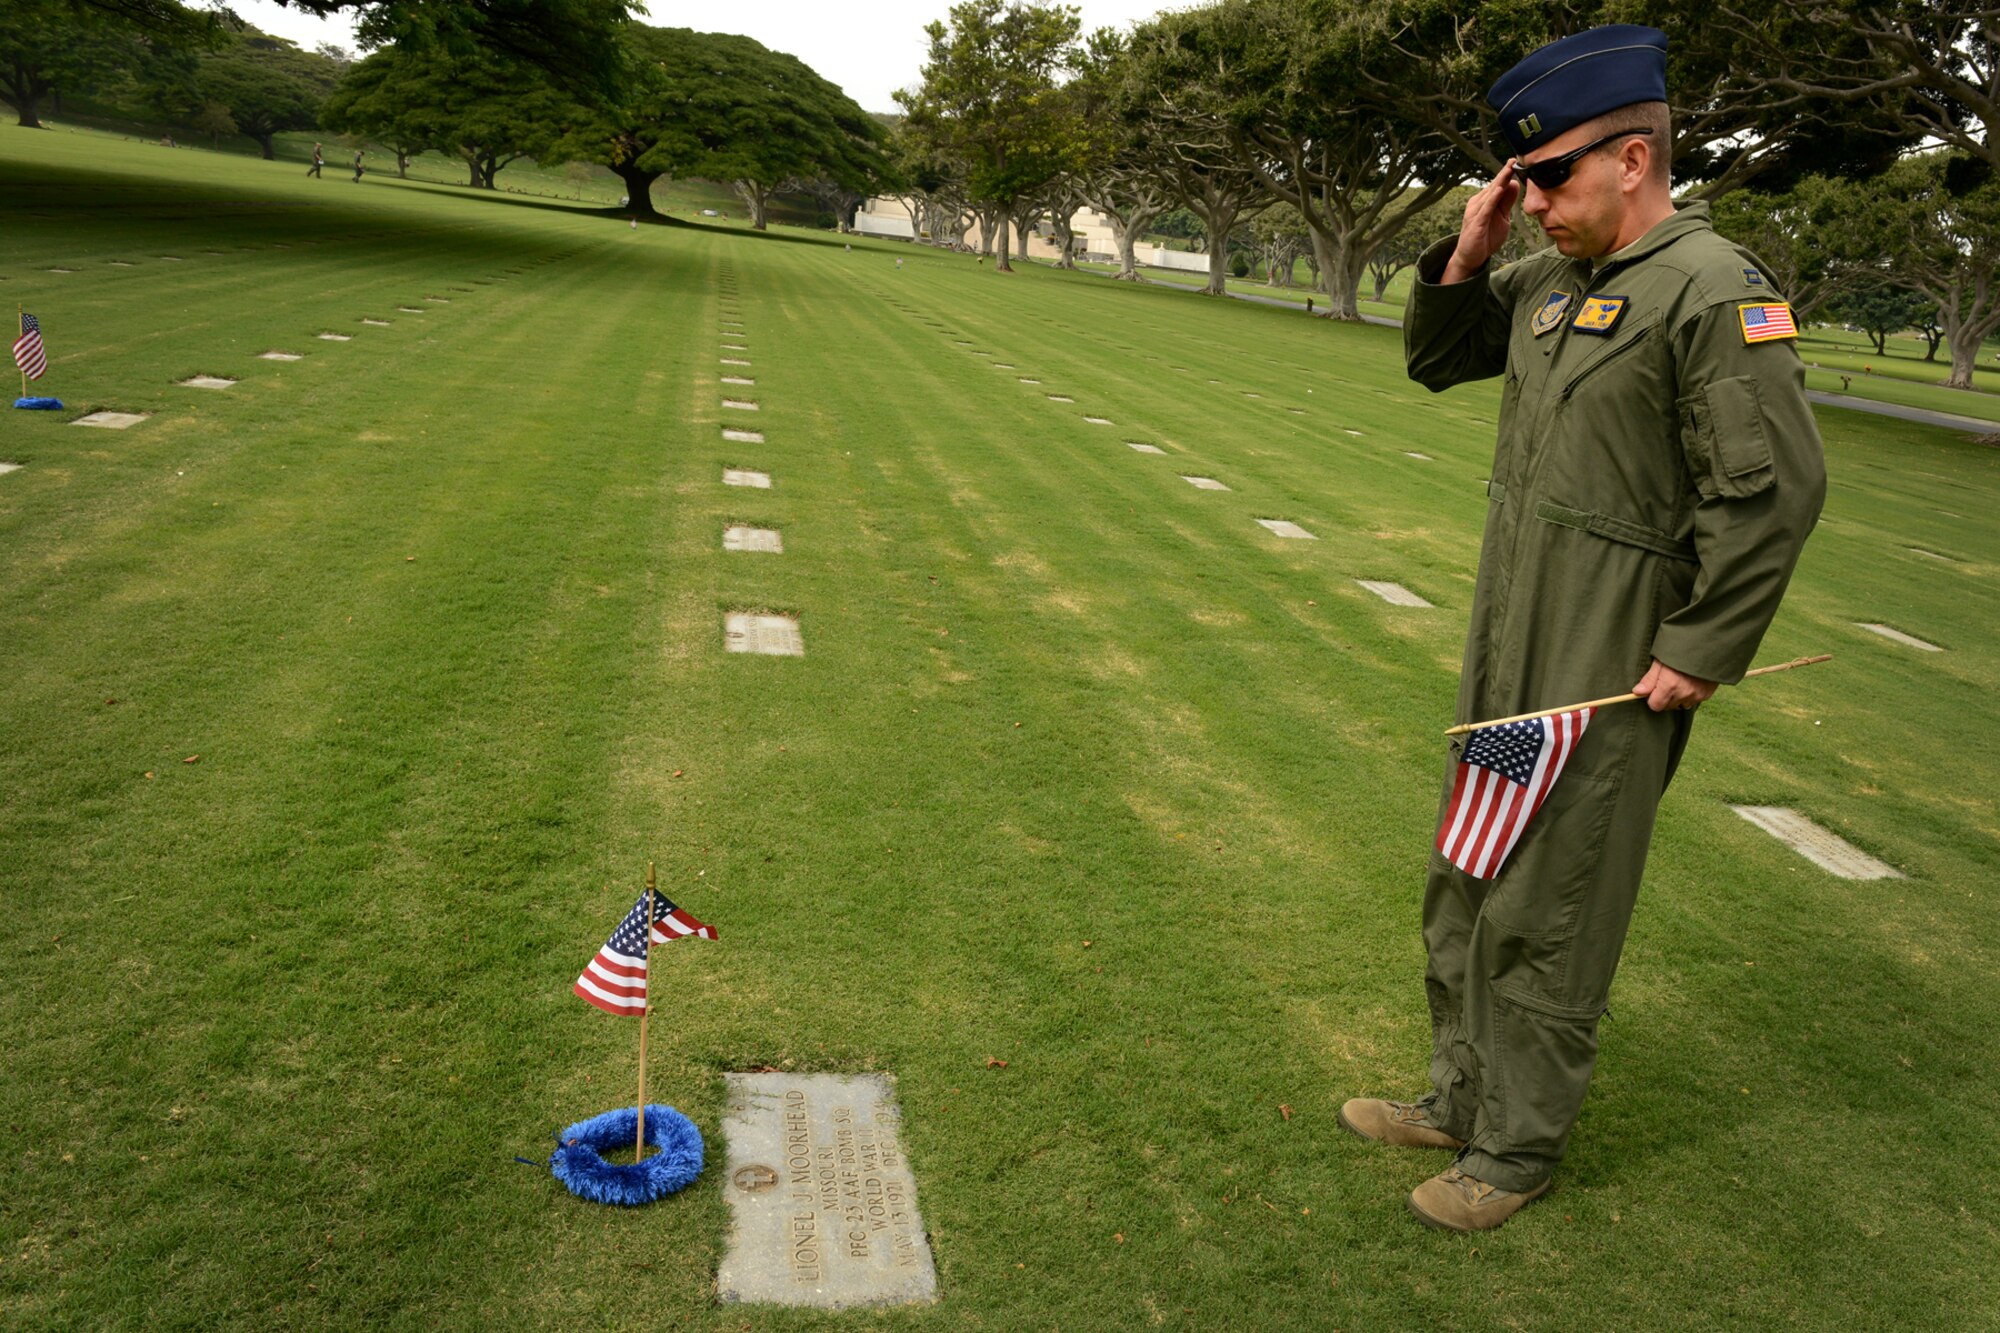 Capt. Andy Stewart, 15th Wing commander’s Action Group, salutes a gravesite after placing an American flag and handmade lei at the top, Dec. 2, 2012, at the National Cemetery of the Pacific, at Punchbowl in Honolulu. Stewart, and nine other volunteers placed 92 flags among the 34,000 gravesites on the grounds of the cemetery to honor the men who lost their lives at Hickam Field on Dec. 7, 1941. Stewart cleaned debris from each of the gravesites he placed a marker and saluted each Airman. (U.S. Air Force photo/Staff Sgt. Mike Meares)  